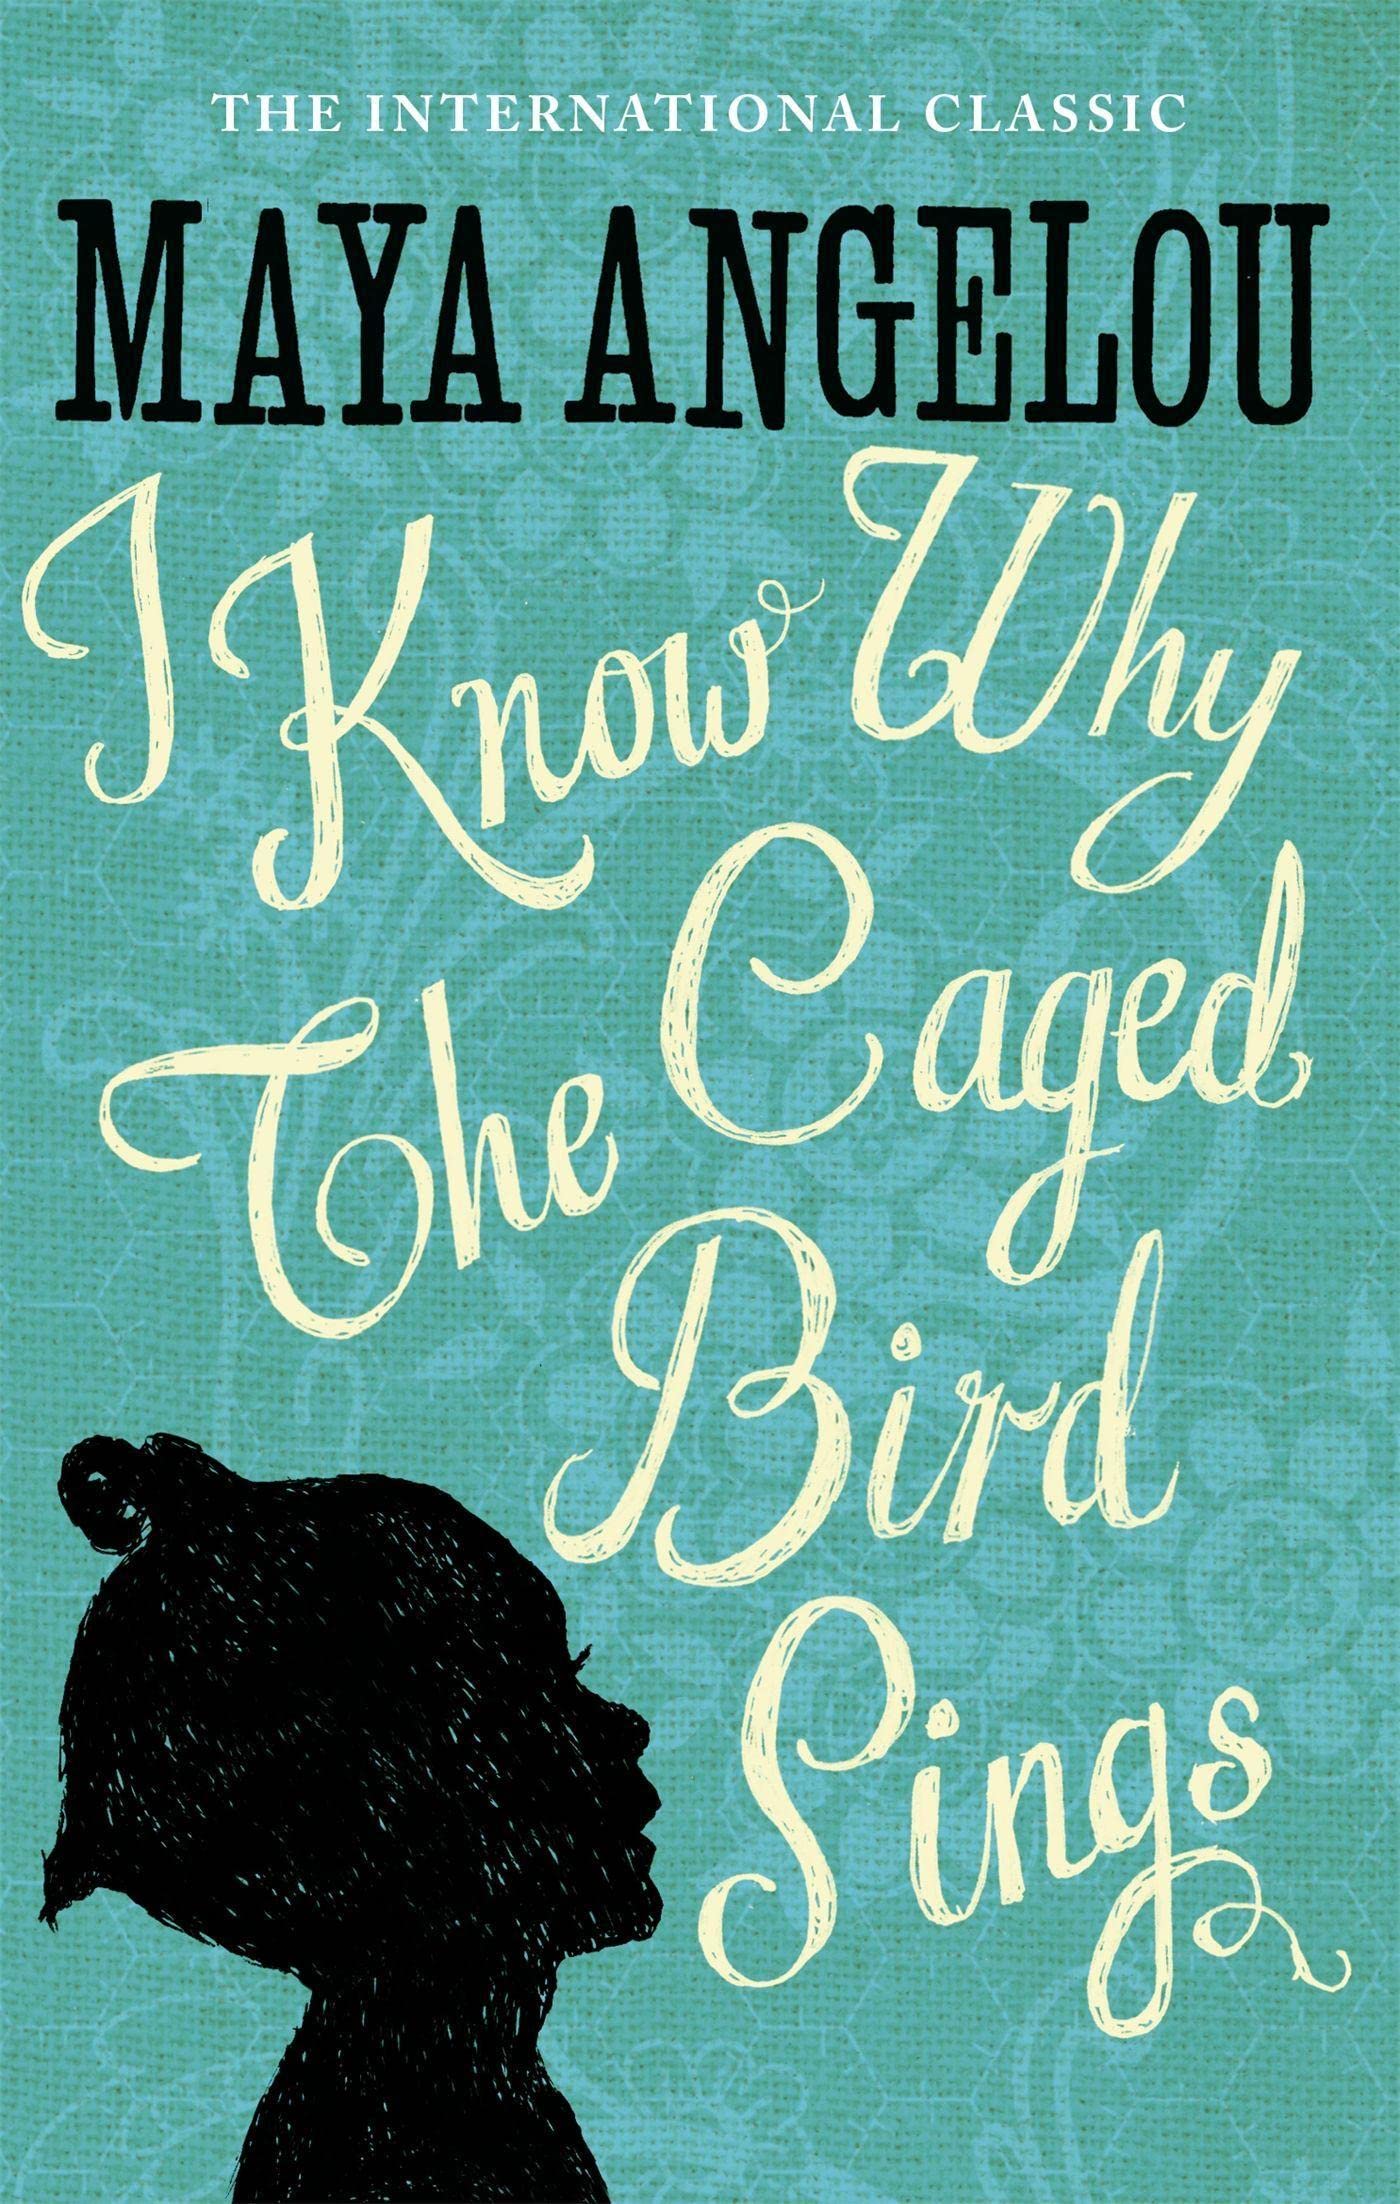 maya angelou's i know why the caged bird sings